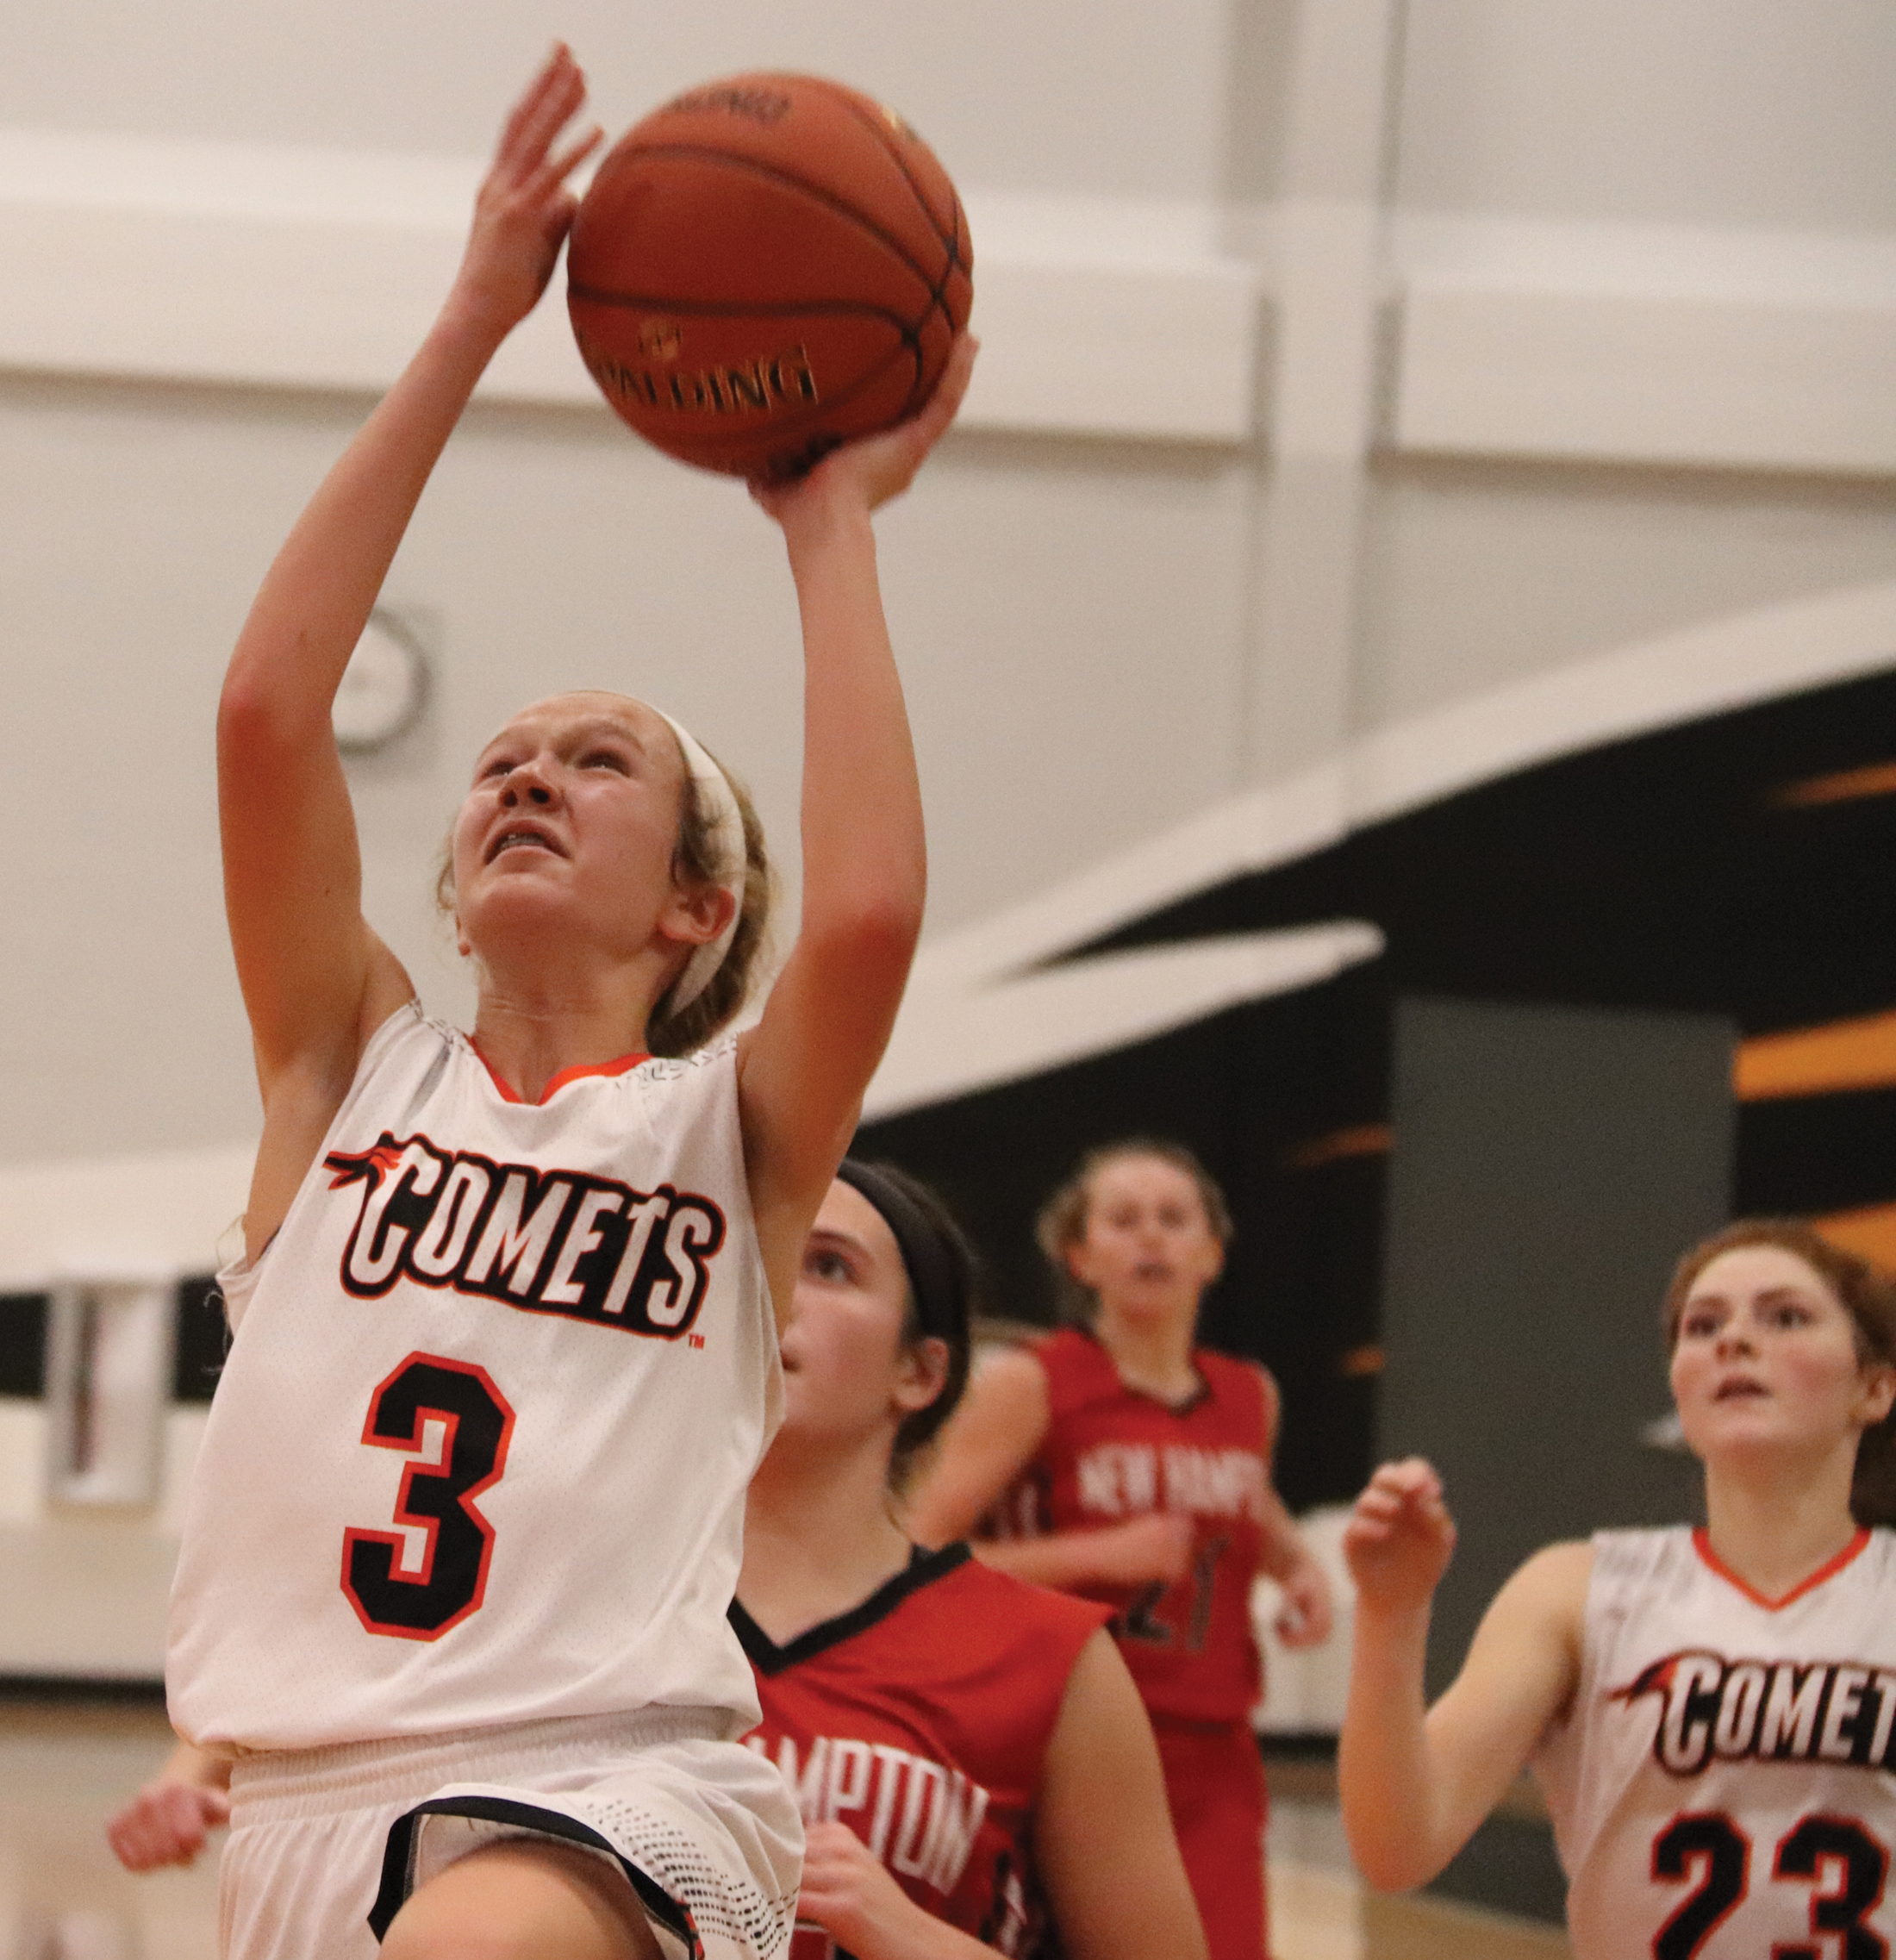 Comets fall to Chickasaws, 60-40